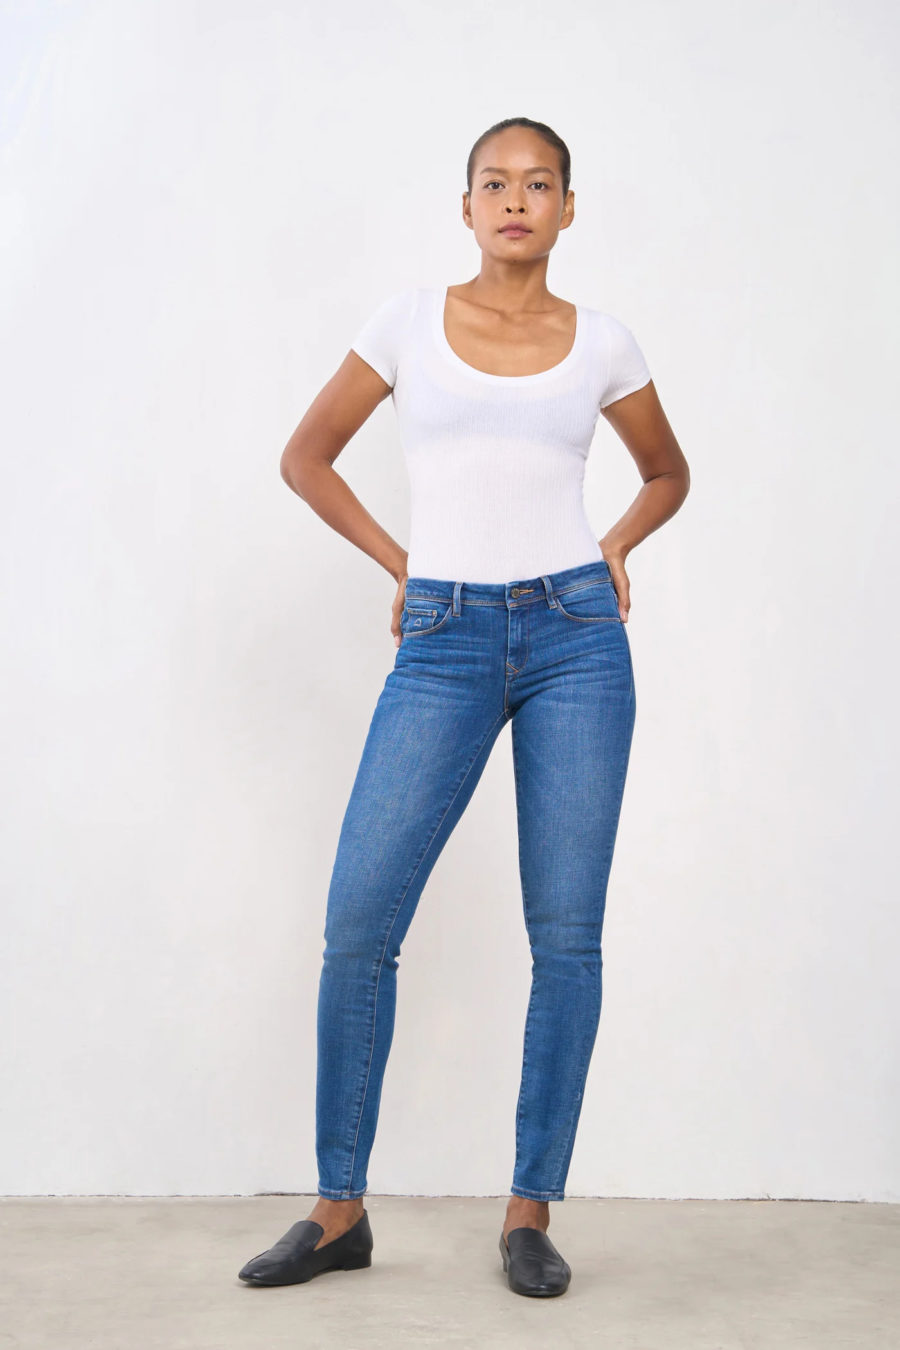 woman wearing jeans and white t-shirt